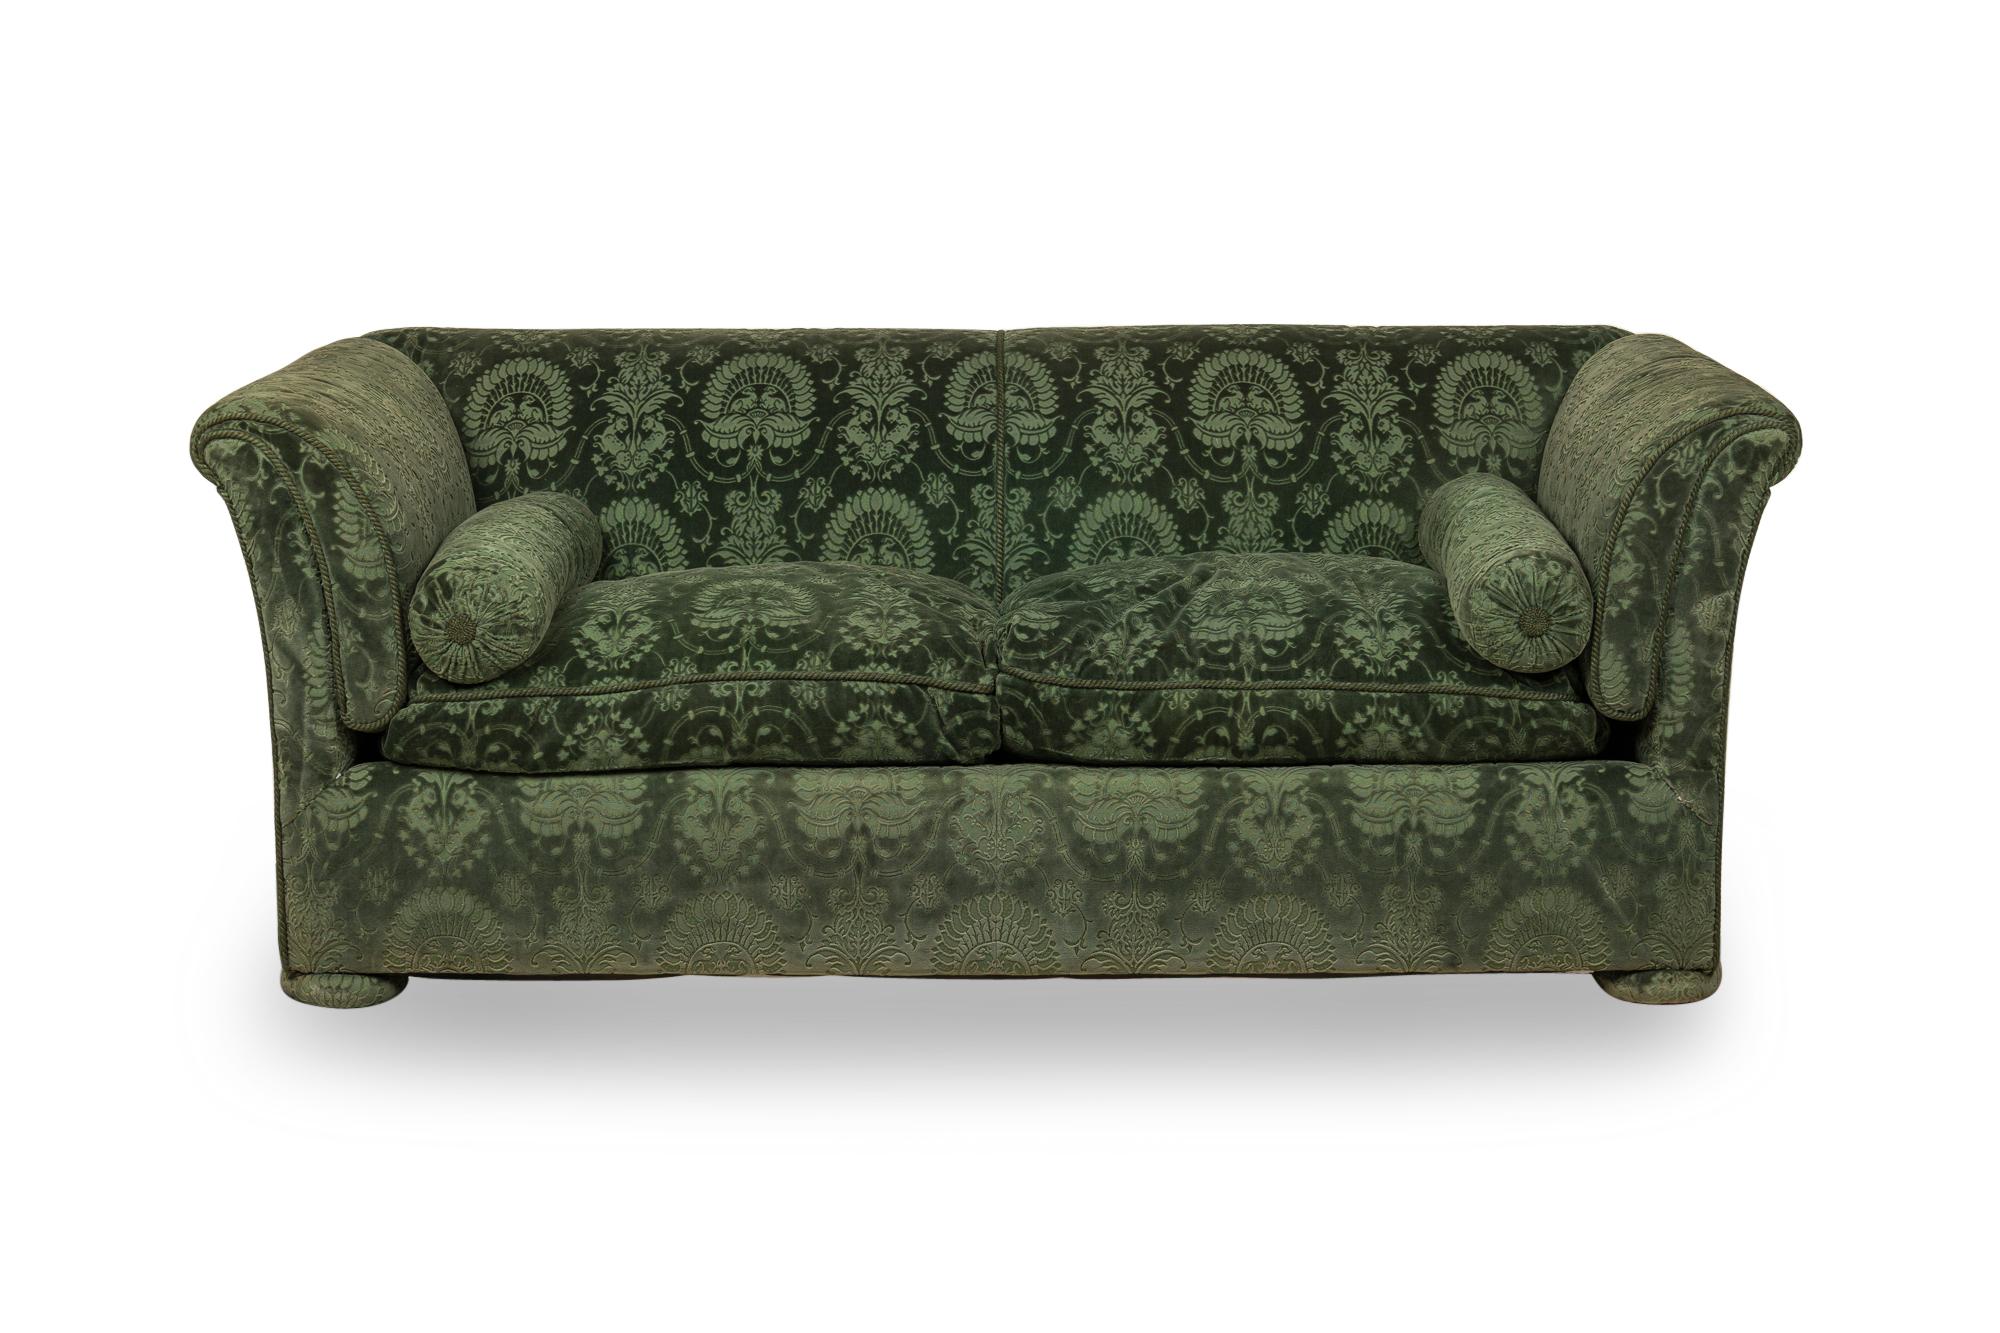 Pair of French Victorian style sofas with high backs and arms that flare gently outward, upholstered in a dark blue and green damask velvet with matching bolster pillows and removable seat cushions, resting on four upholstered bun feet.